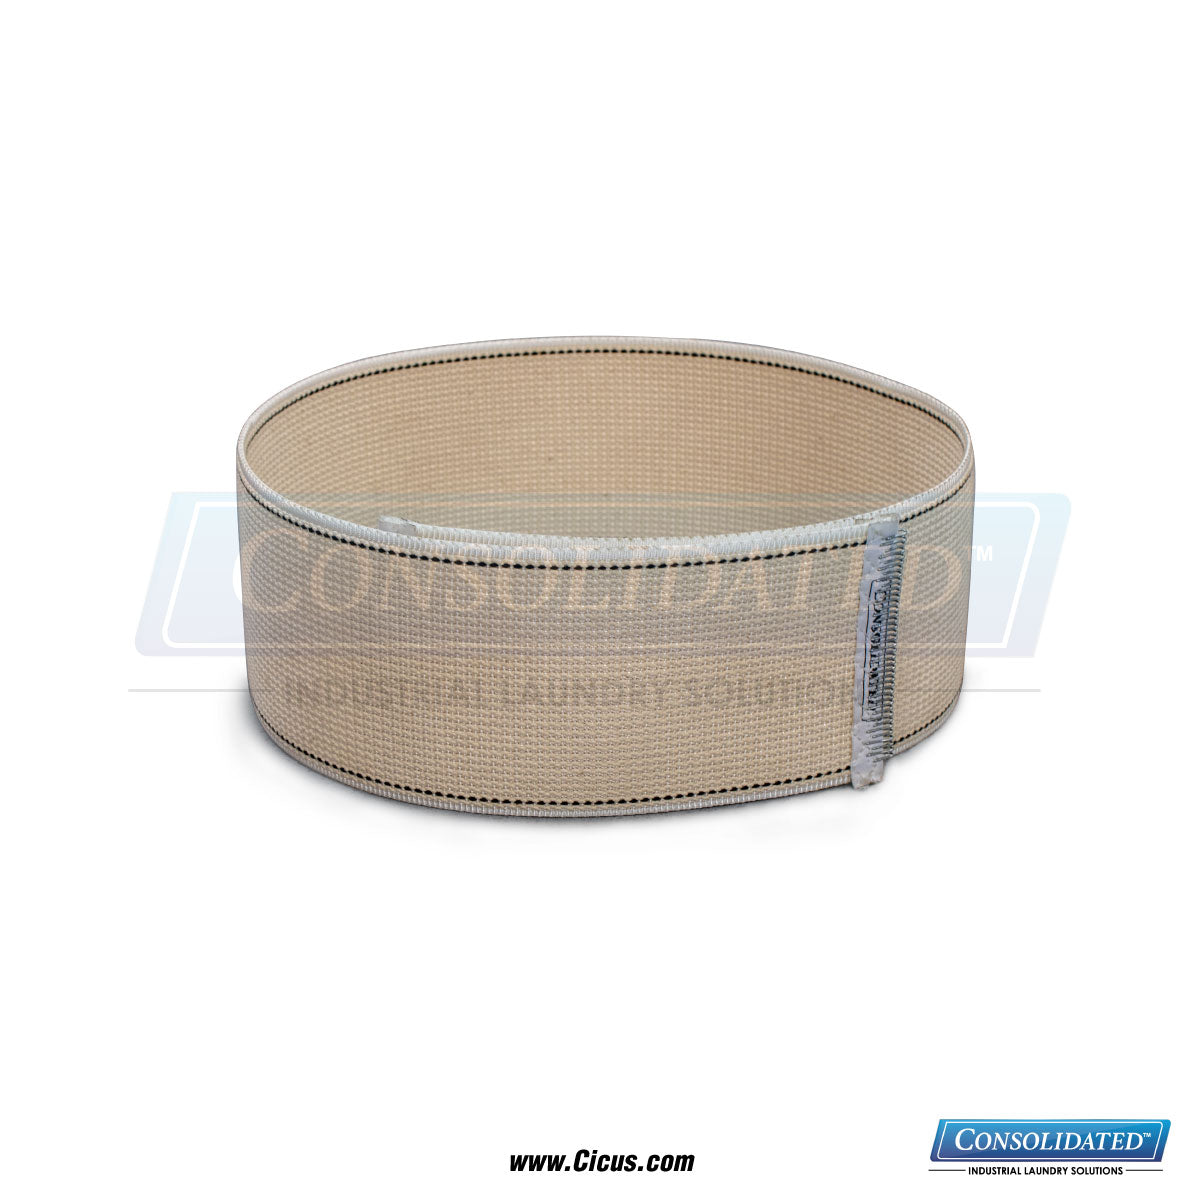 CIC Exclusive Chicago Dryer Canvas Ribbon - 2" x 113" (1001-019)